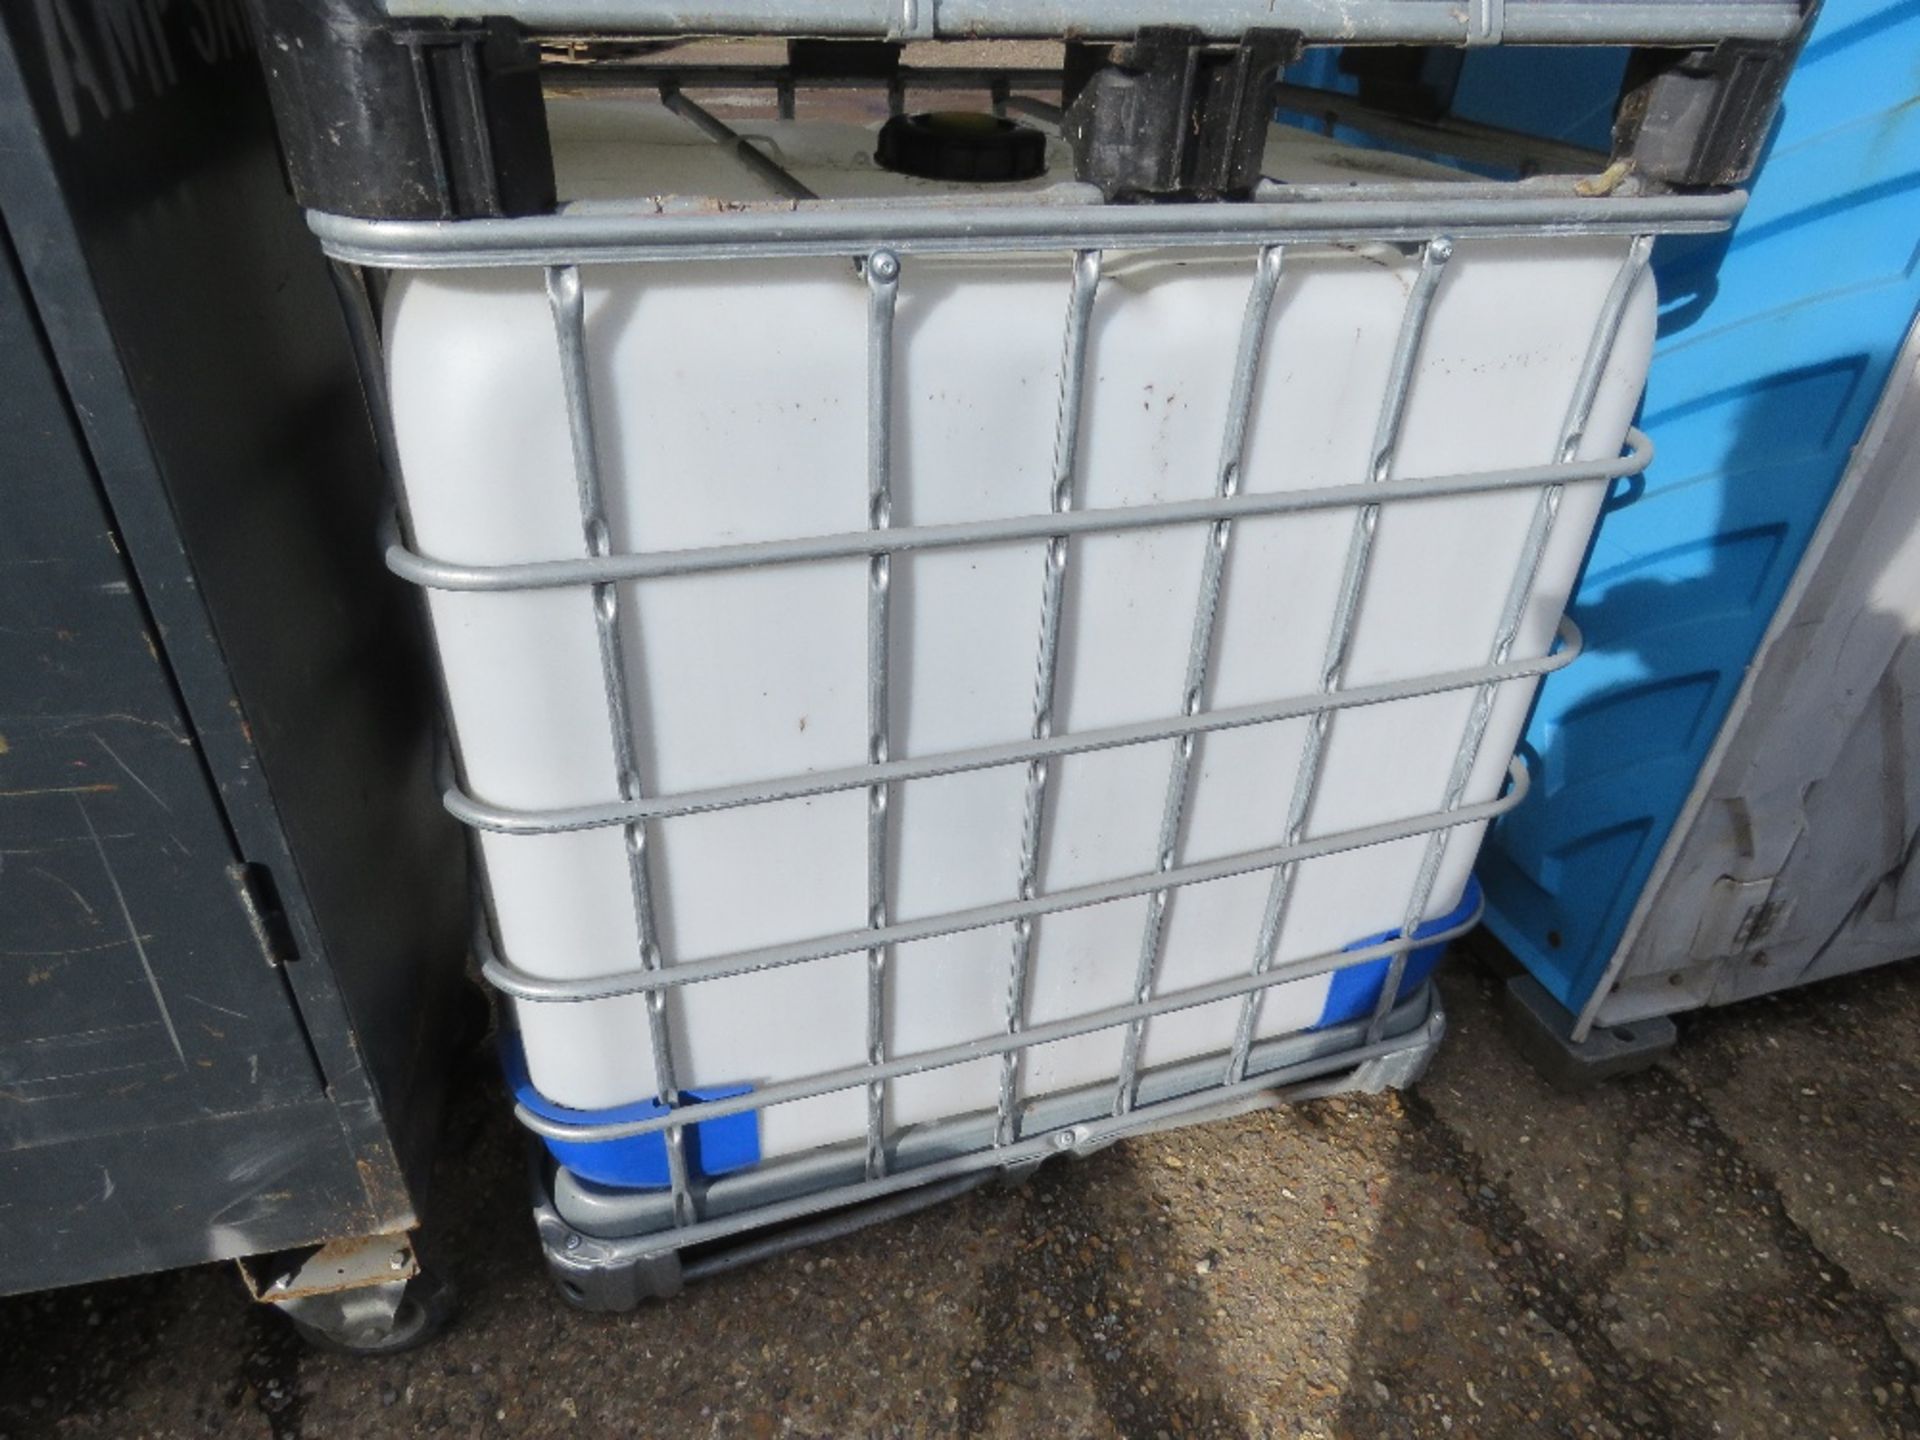 2NO IBC TYPE PLASTIC BOWSER TANKS ON PALLETS. THIS LOT IS SOLD UNDER THE AUCTIONEERS MARGIN SCHEM